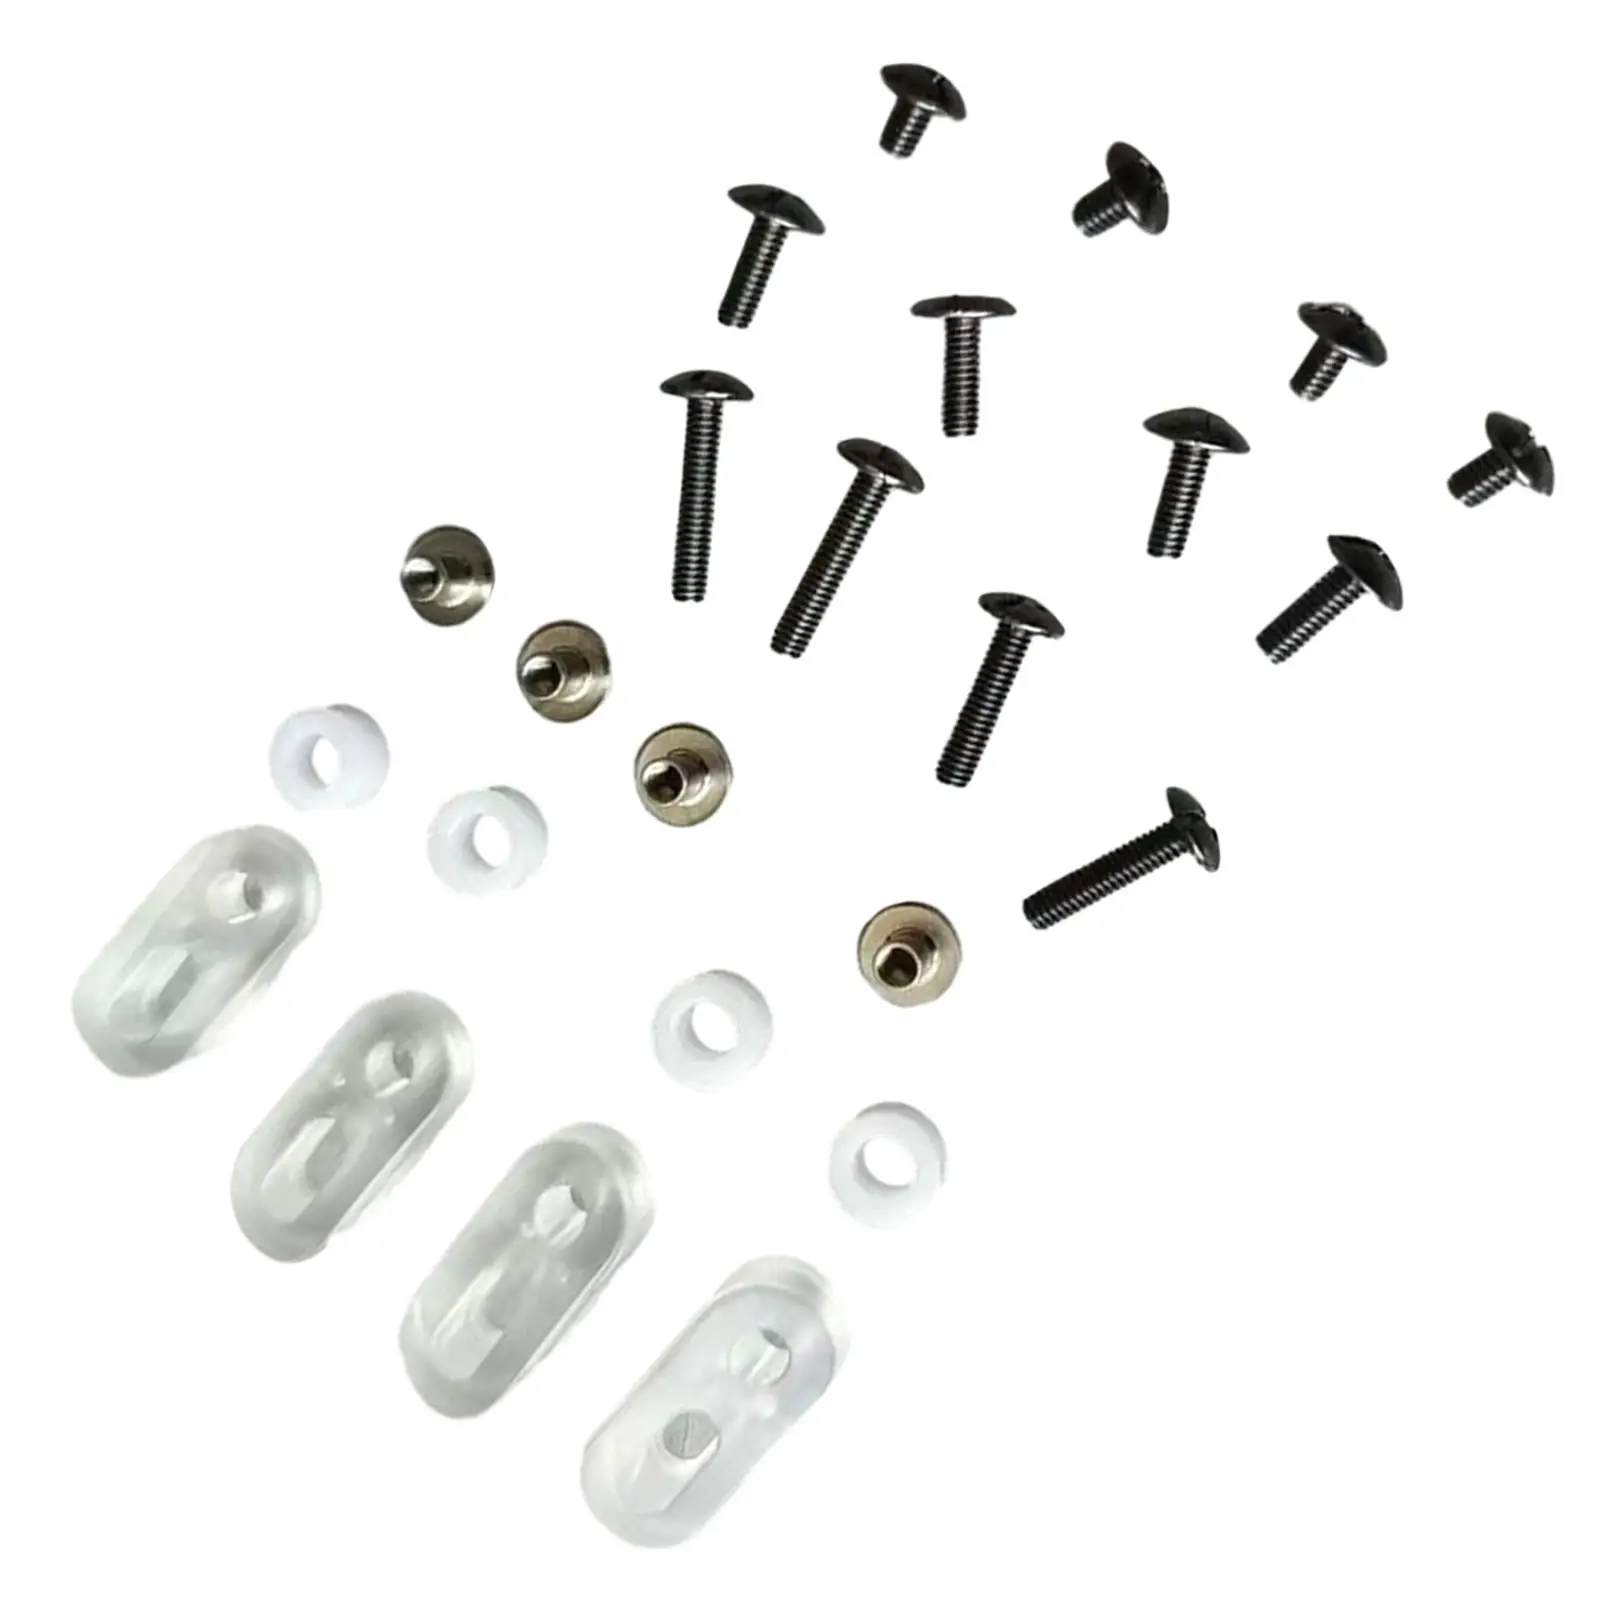 

Ice Hockey Visor Hardware Kit Screw Washers Nuts Replacement Safety Hockey Equipment Accessories Fixings Back up Hardwares